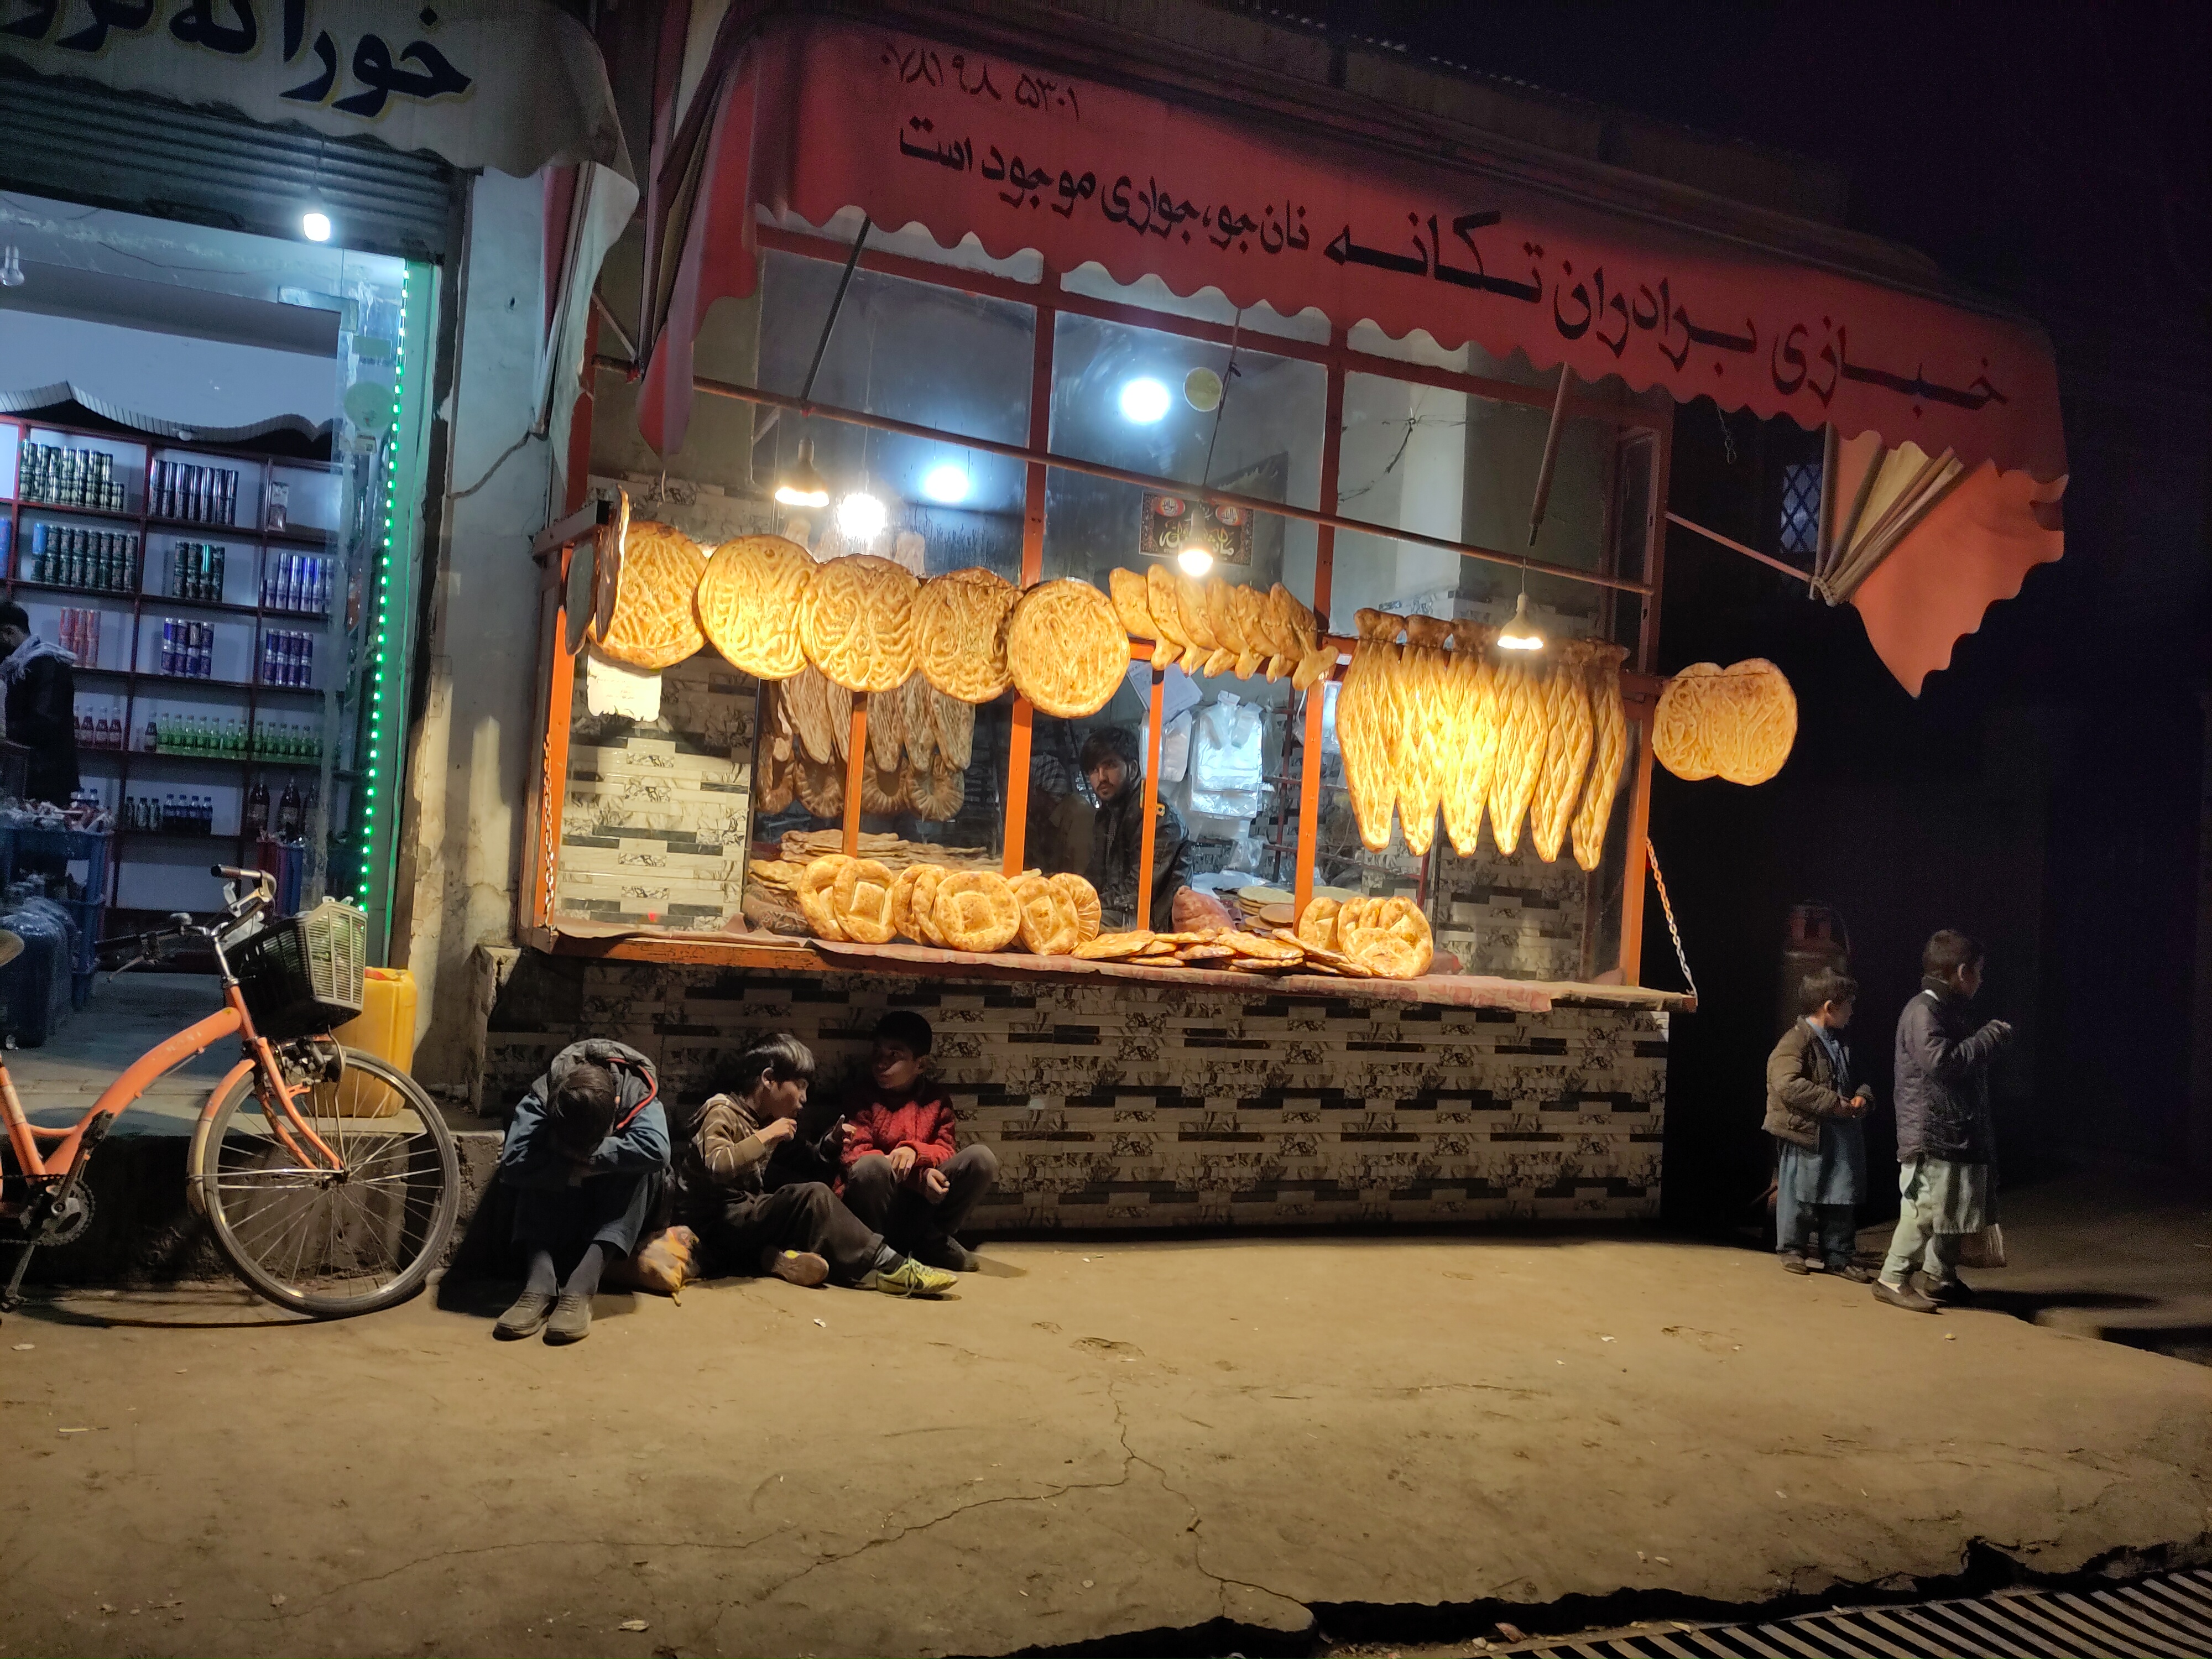 The store front of a bakery is lined with bread hanging, lit by a few lightbulbs in the night. Some children are sitting on the street floor and looking out on onto the street.